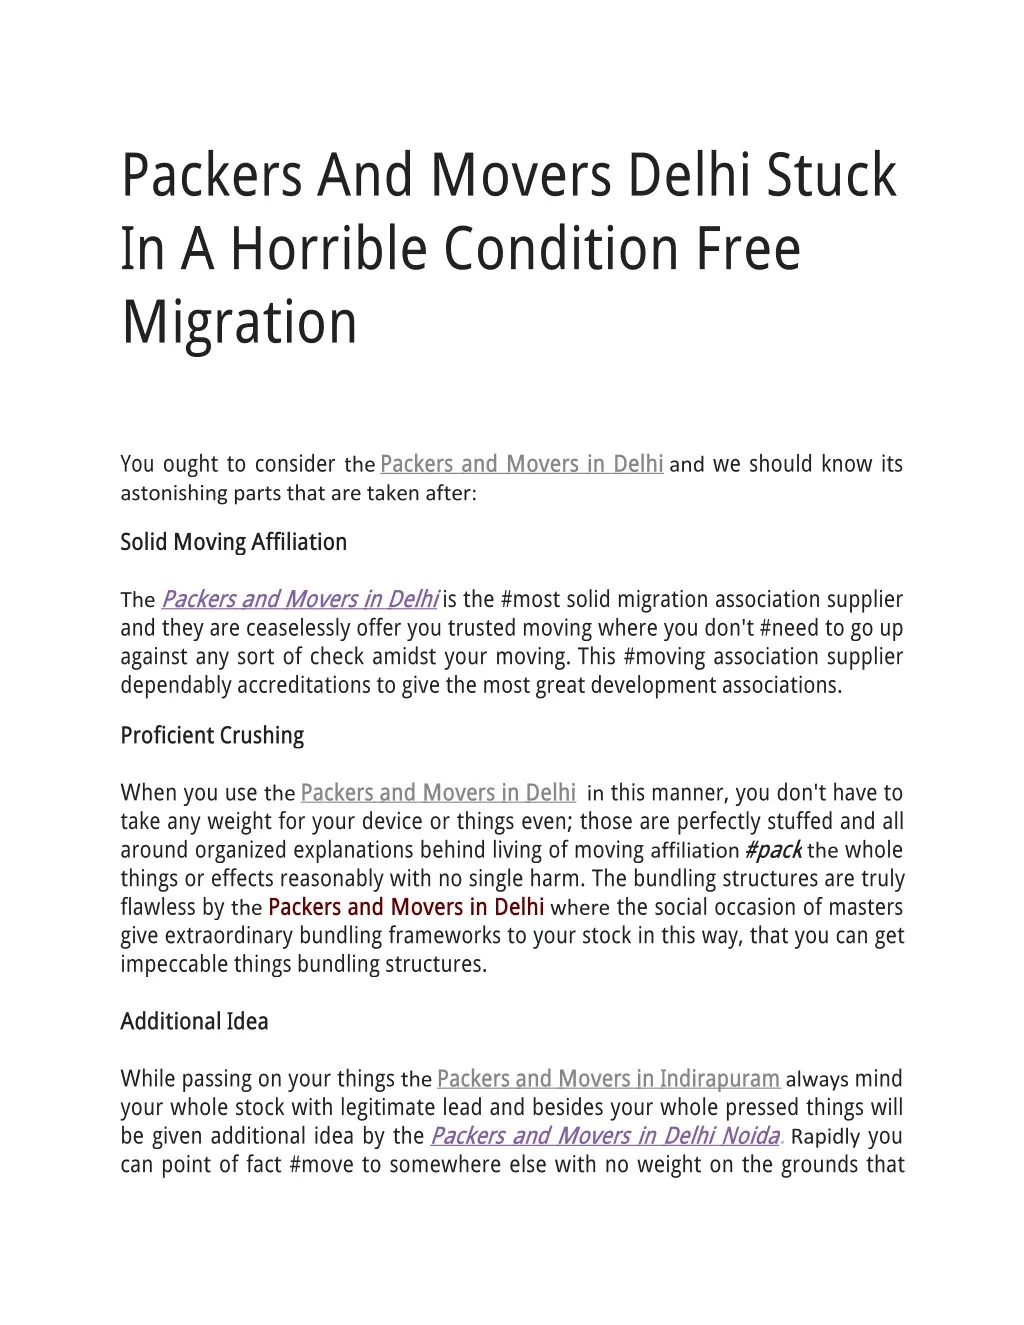 packers and movers delhi stuck in a horrible